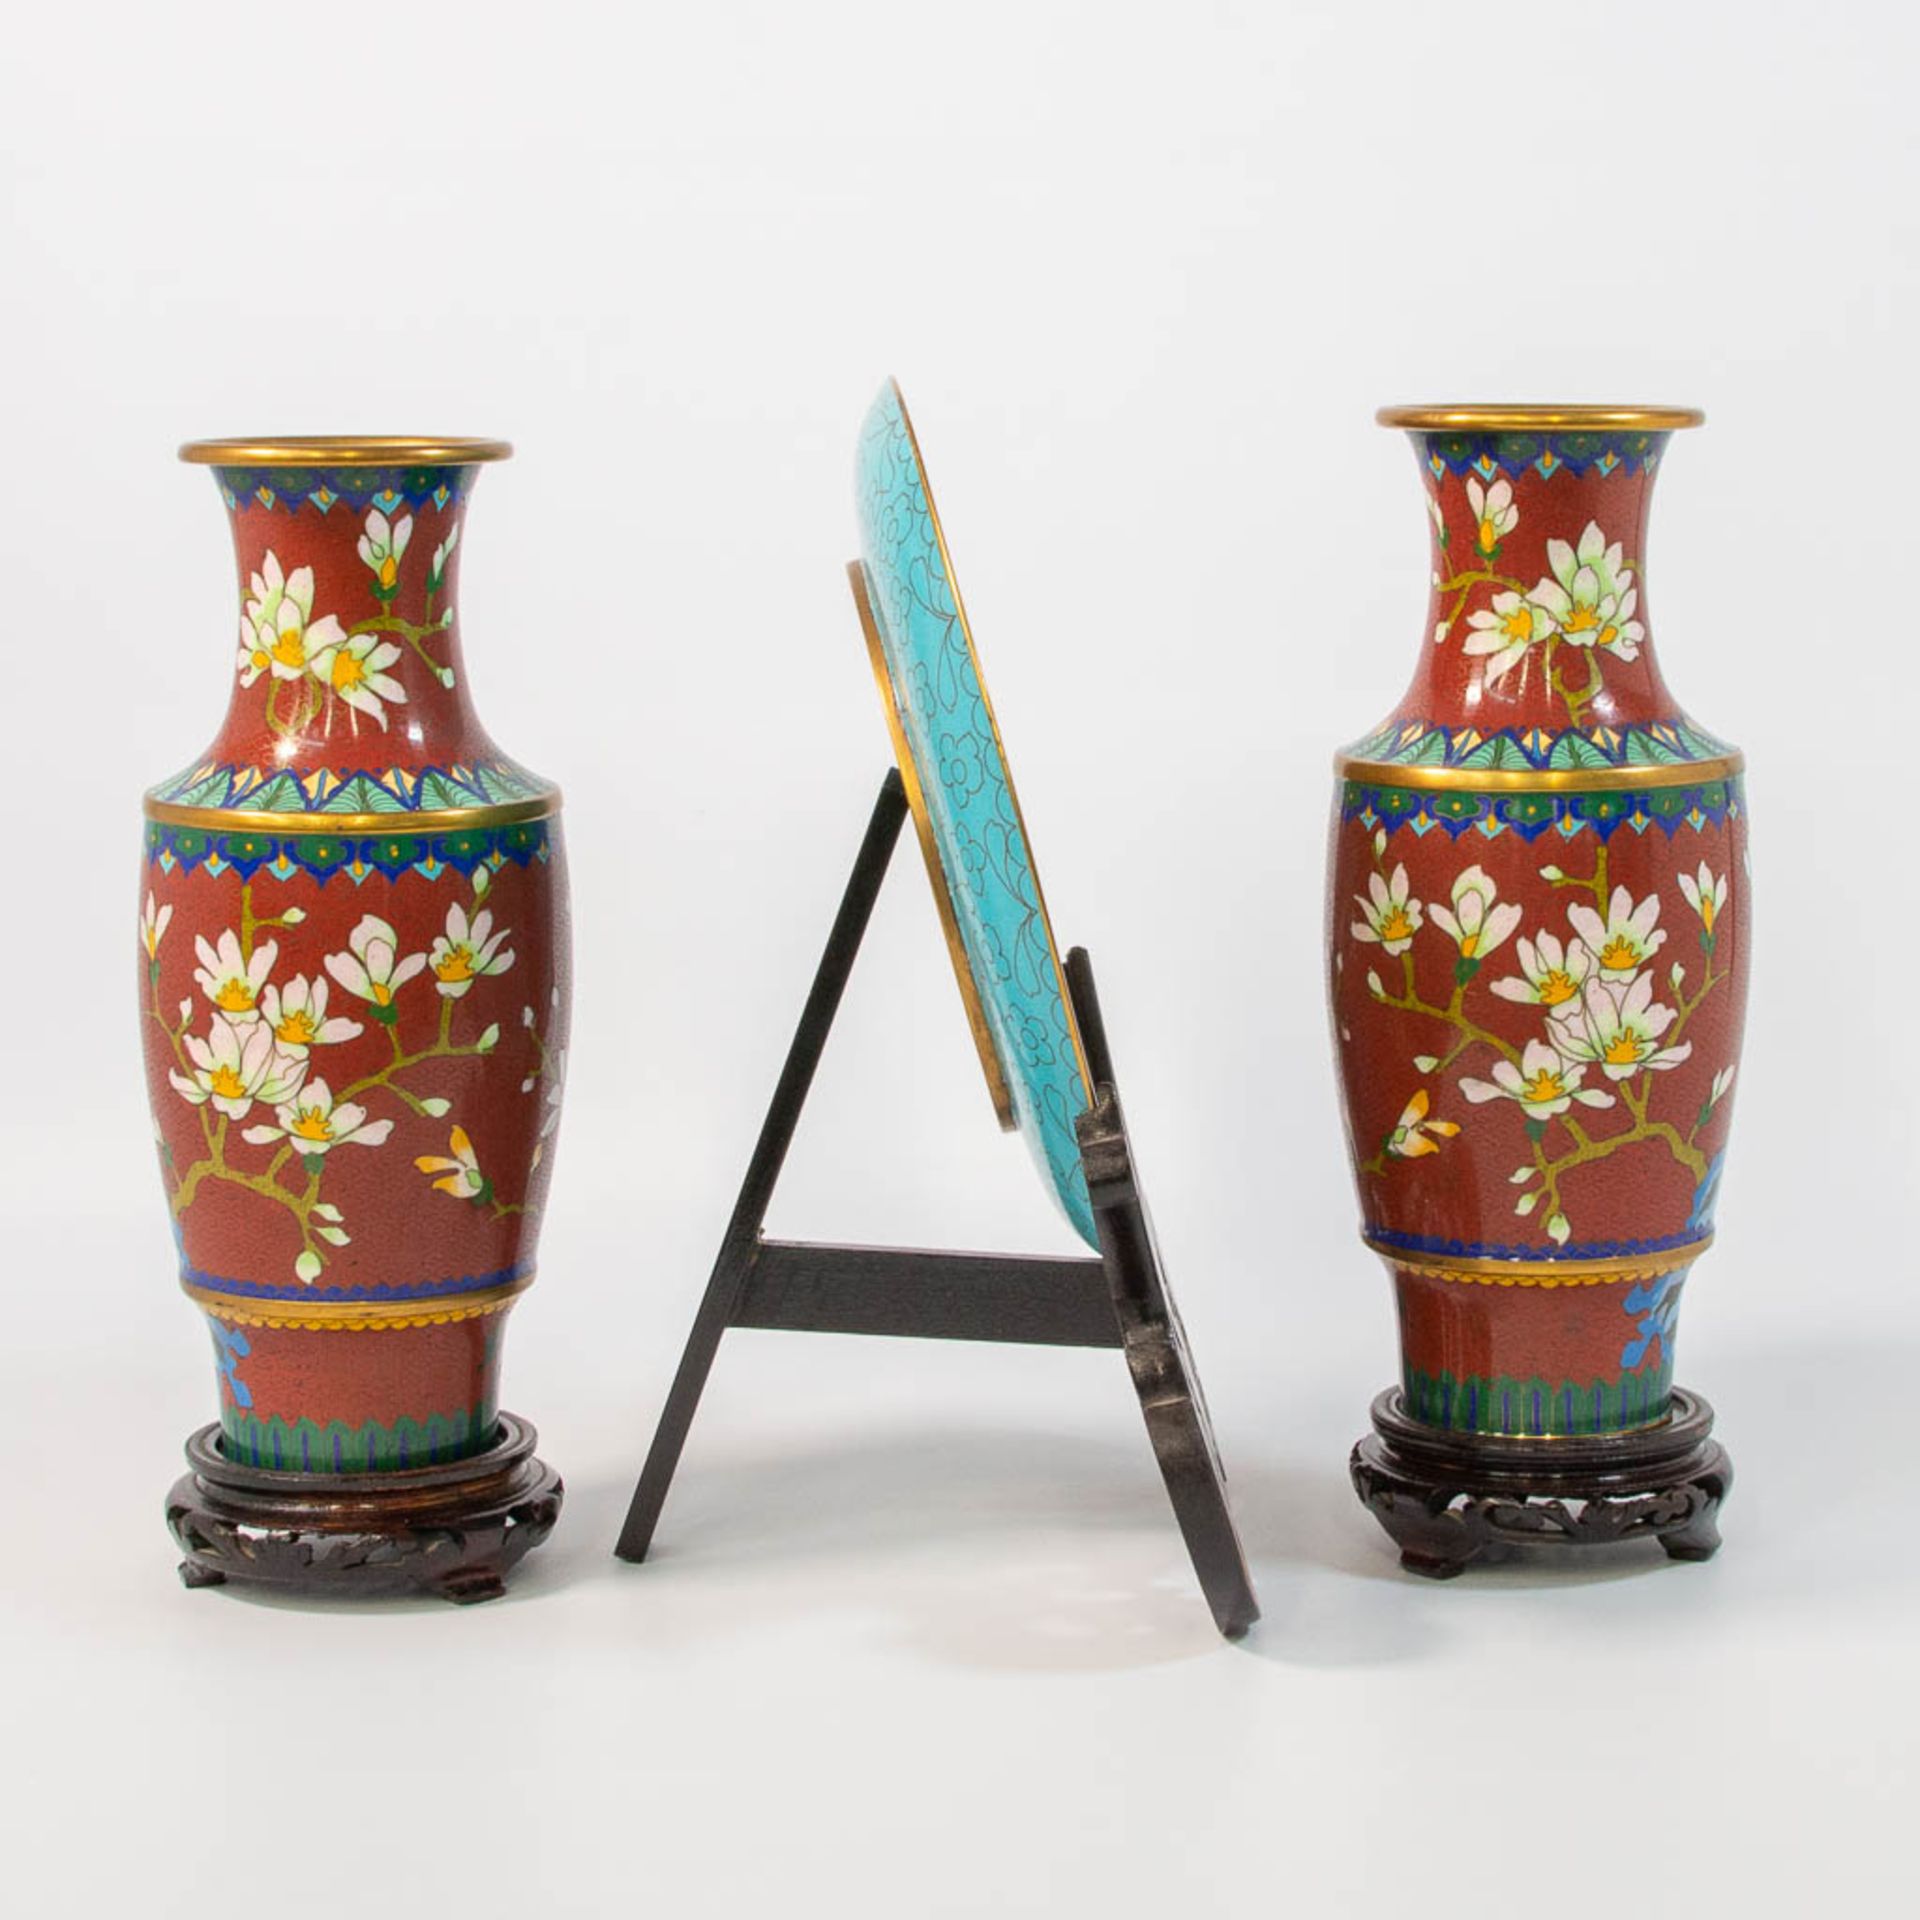 A pair of cloisonné vases and display plate on wood stands. Made of bronze and enamel. - Image 4 of 10